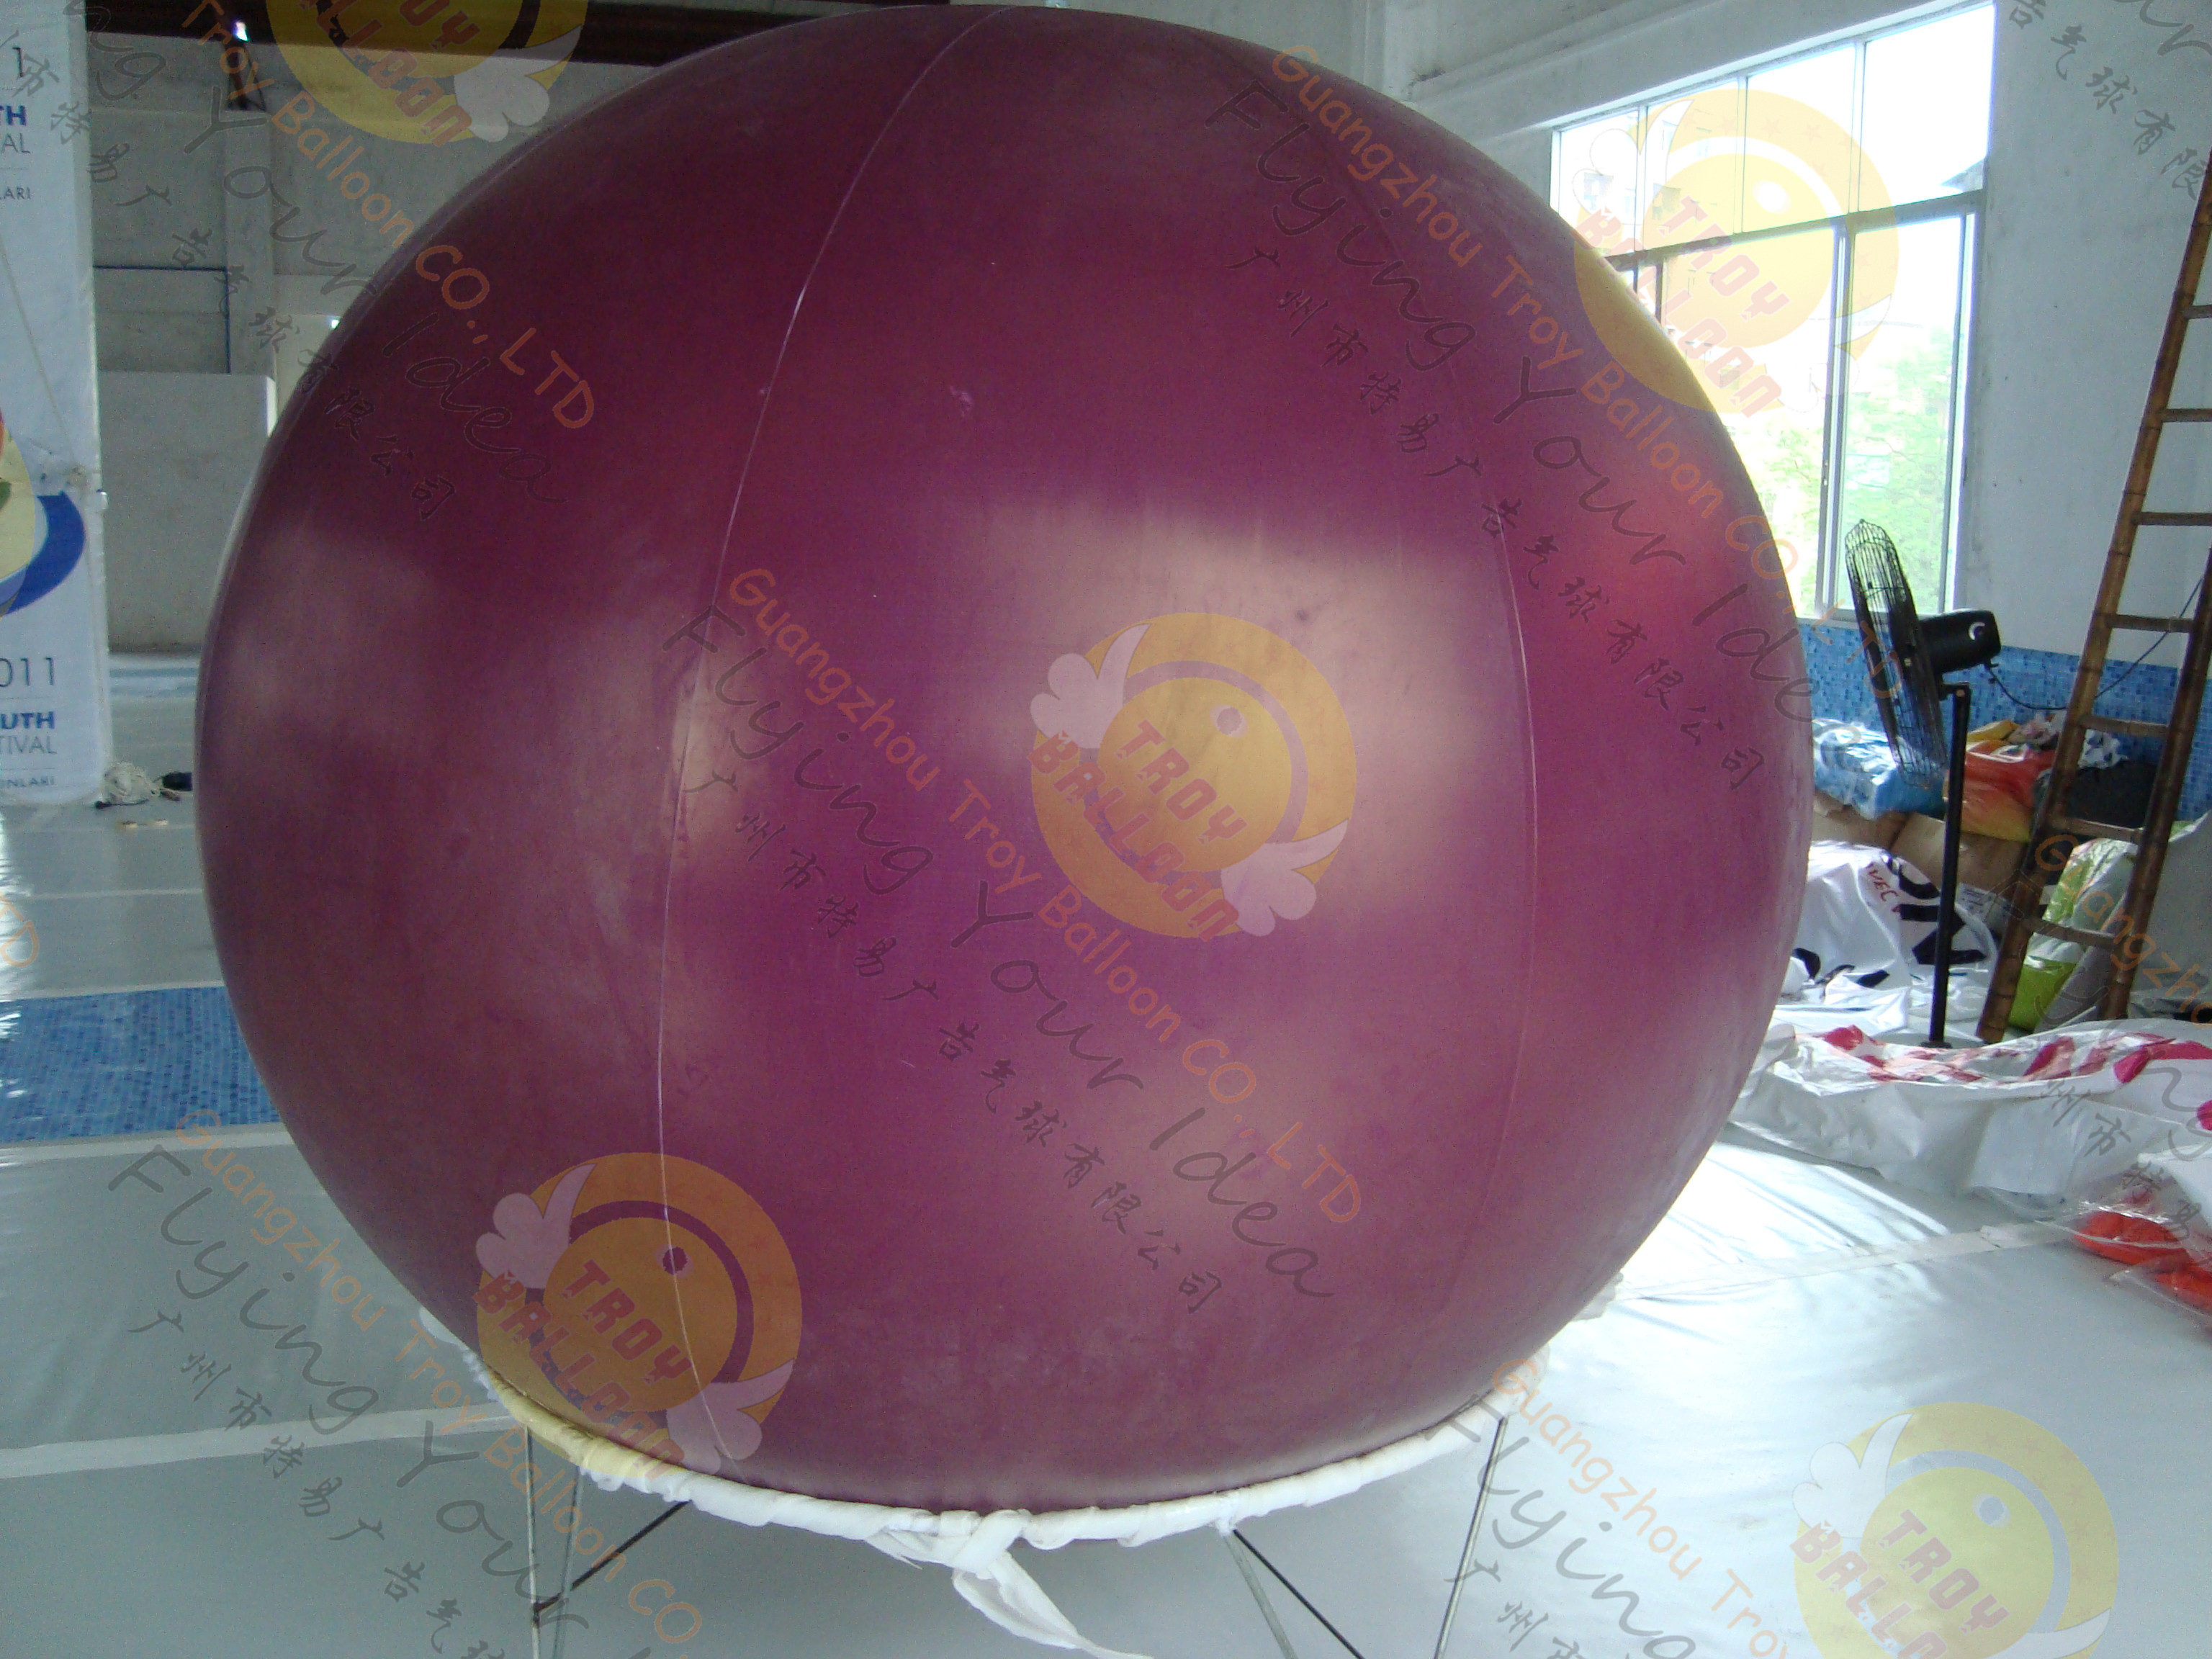  Inflatable Mirrored Big Round Balloons En71 / Astm For Advertisement Manufactures